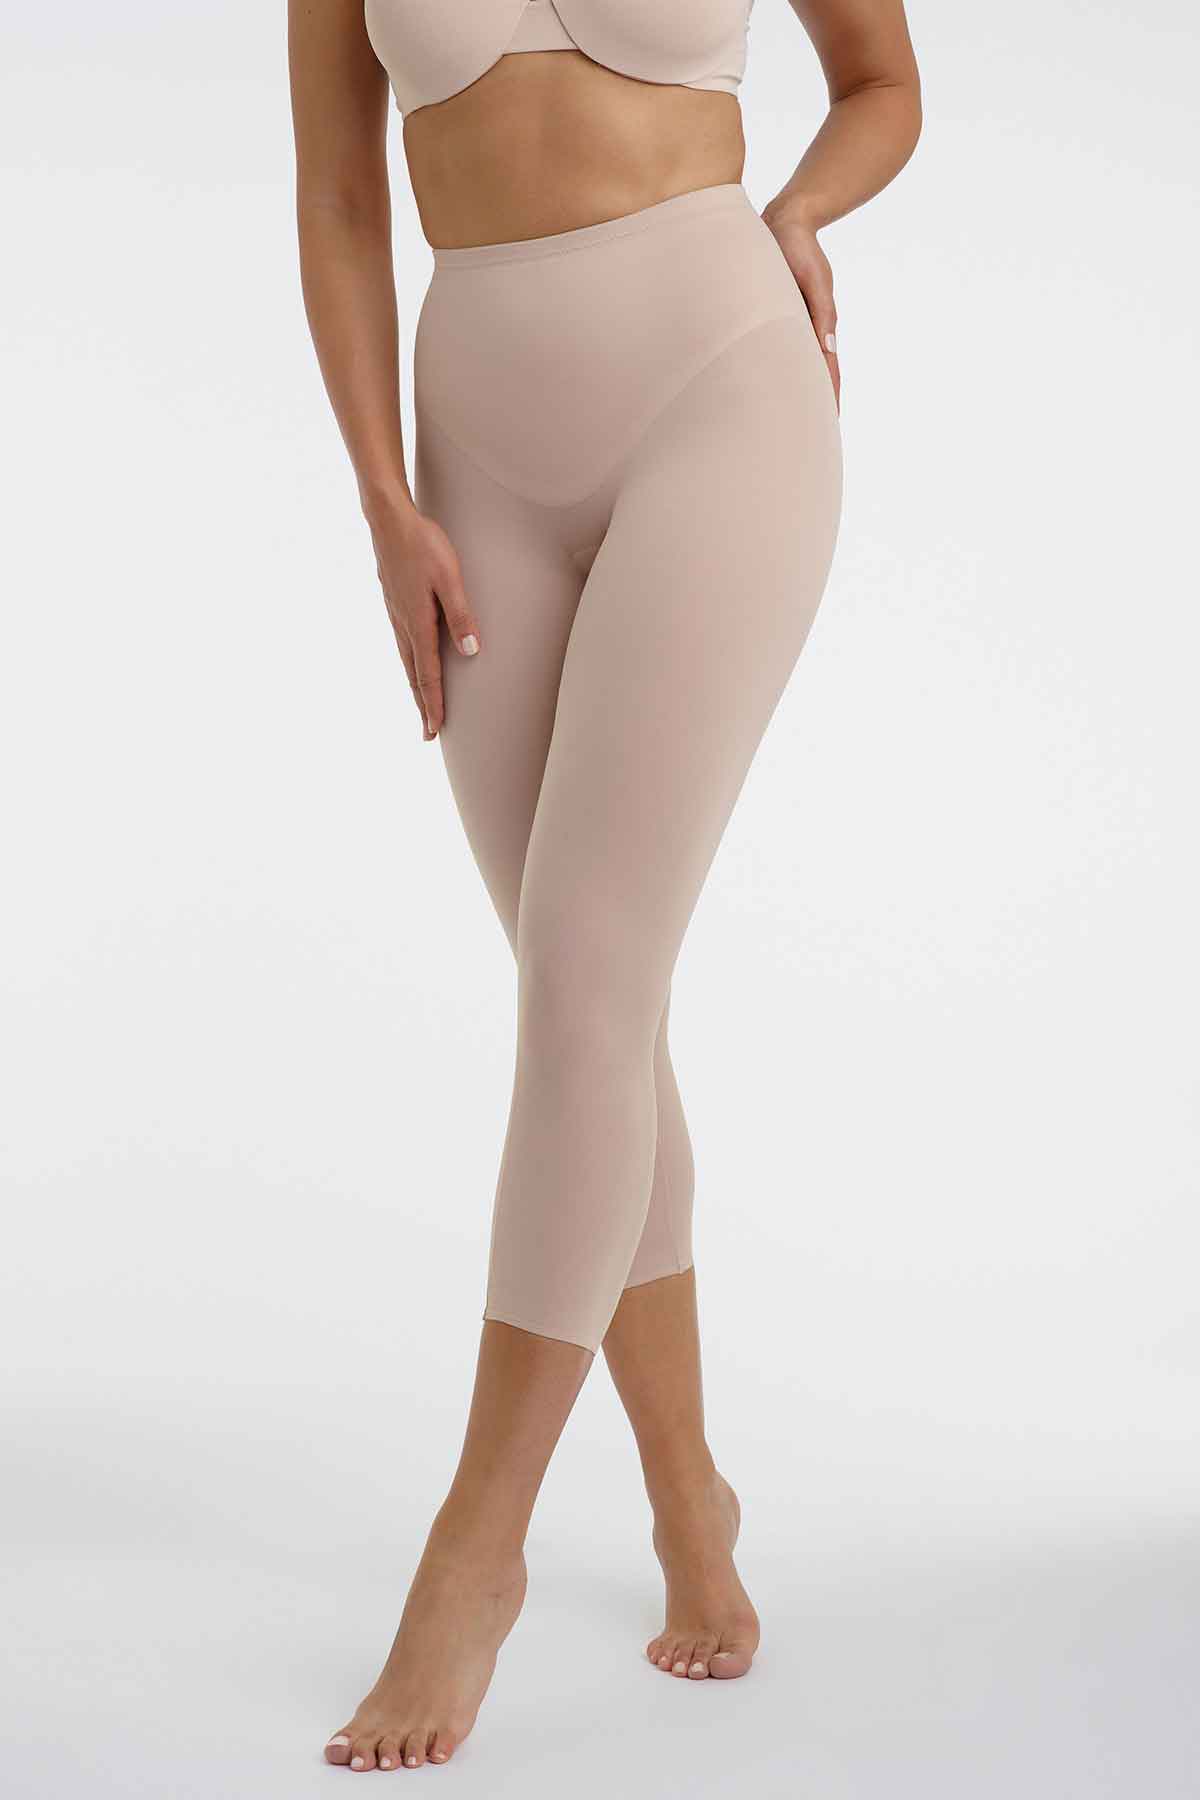 Seamless Shapewear Legging, Extra Firm Control Thigh Slimme (Large, Nude)